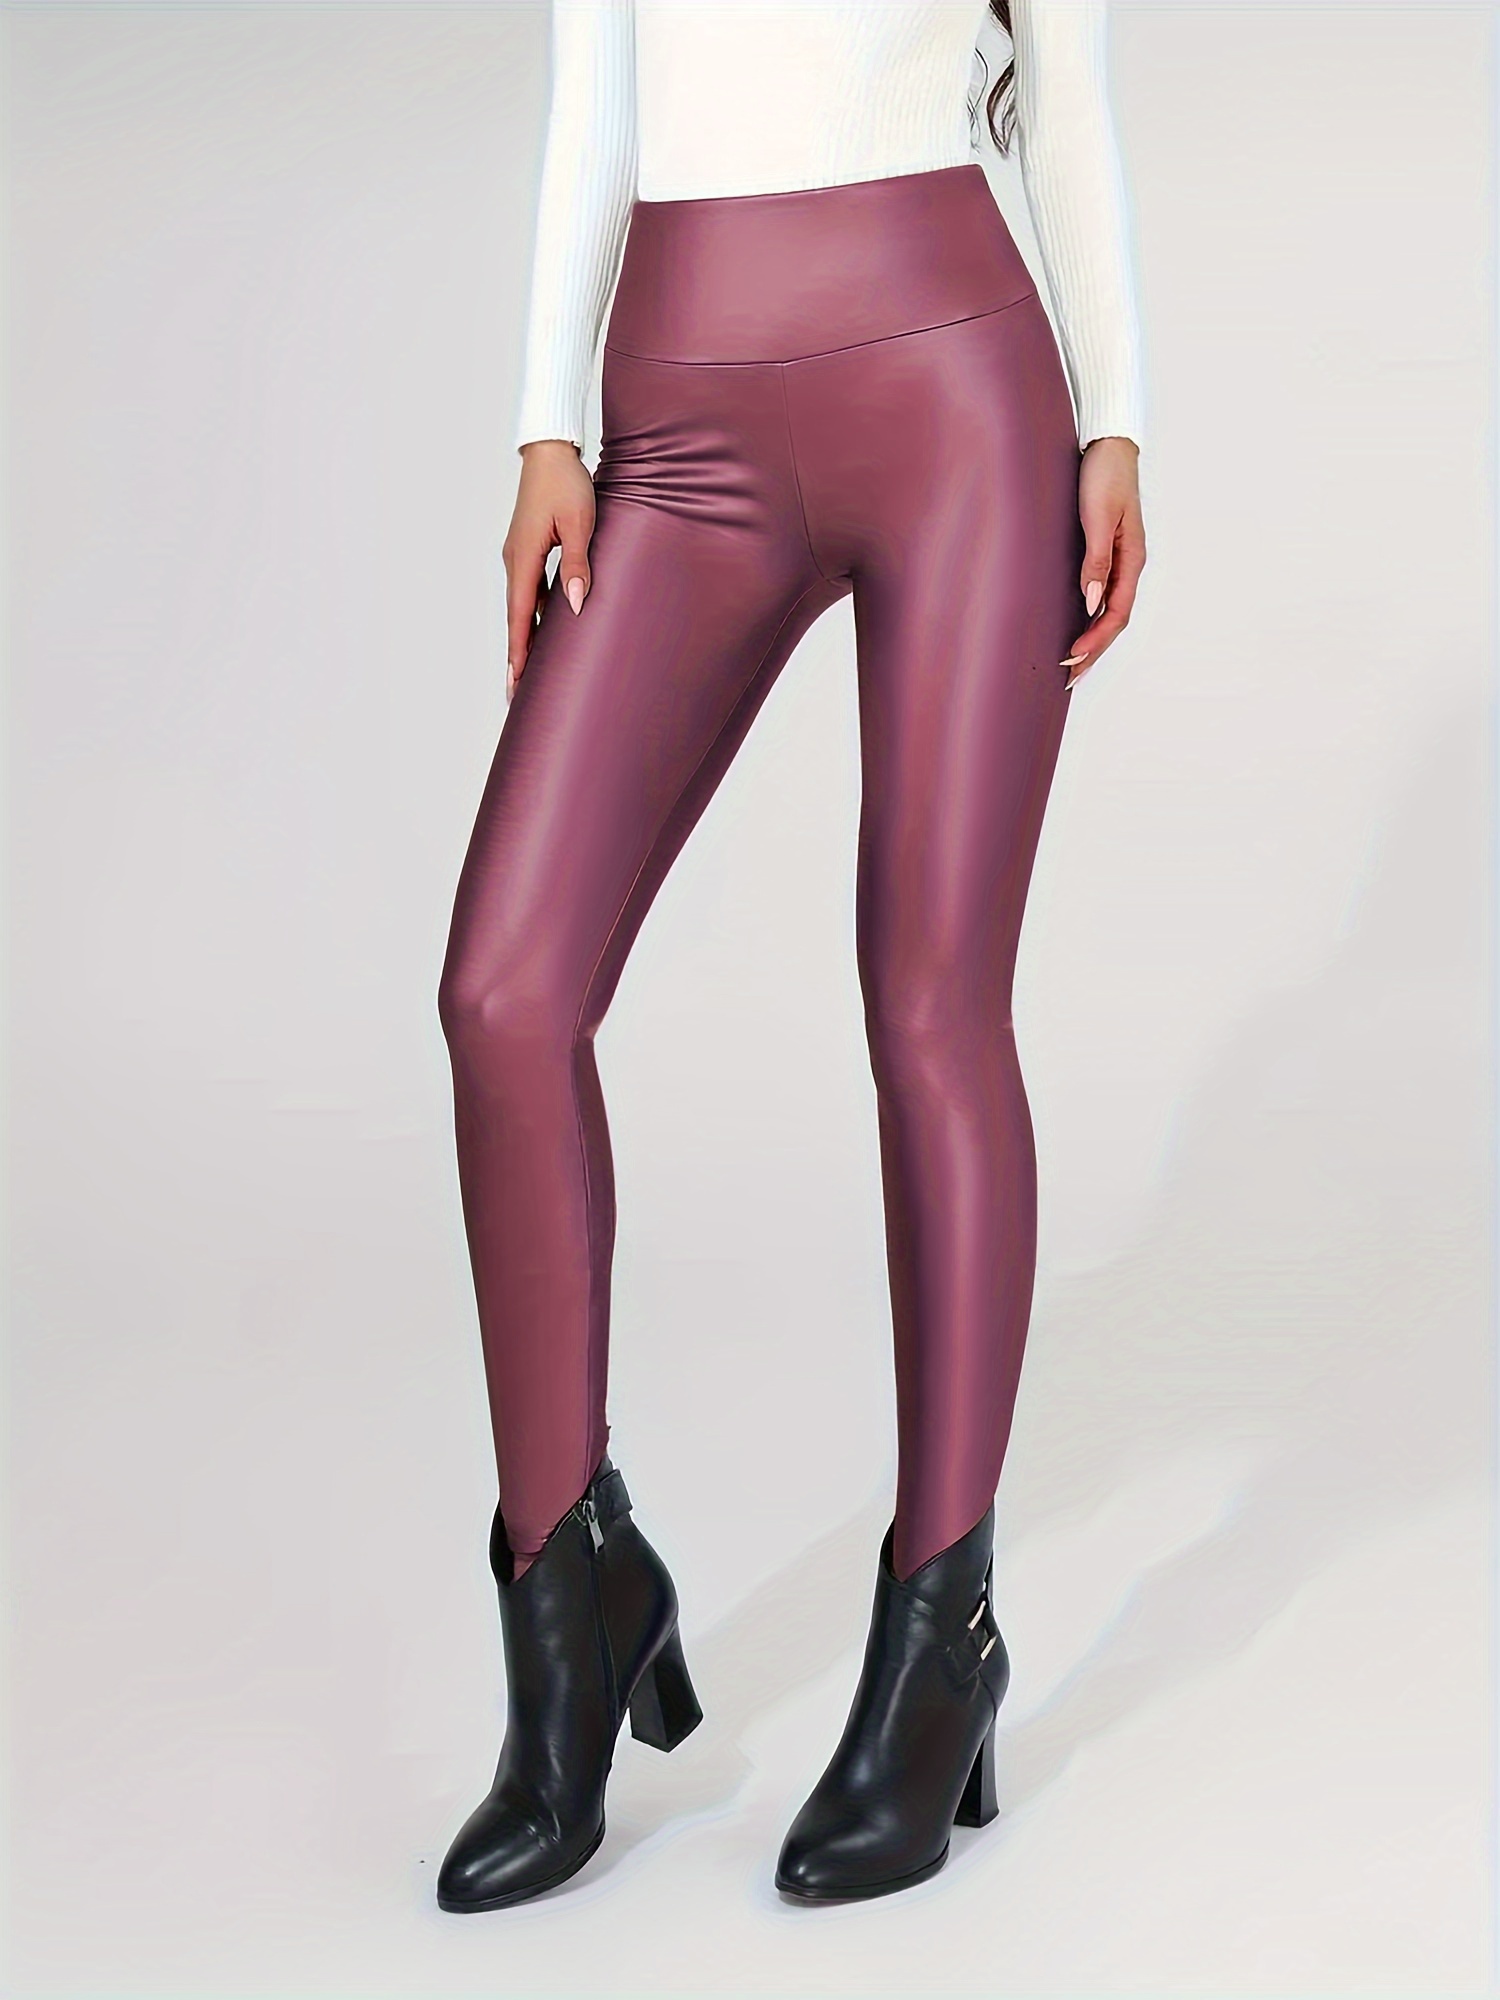 CLIV Faux Leather Leggings for Women Tummy Control High Waisted Stretch  Leather Pants